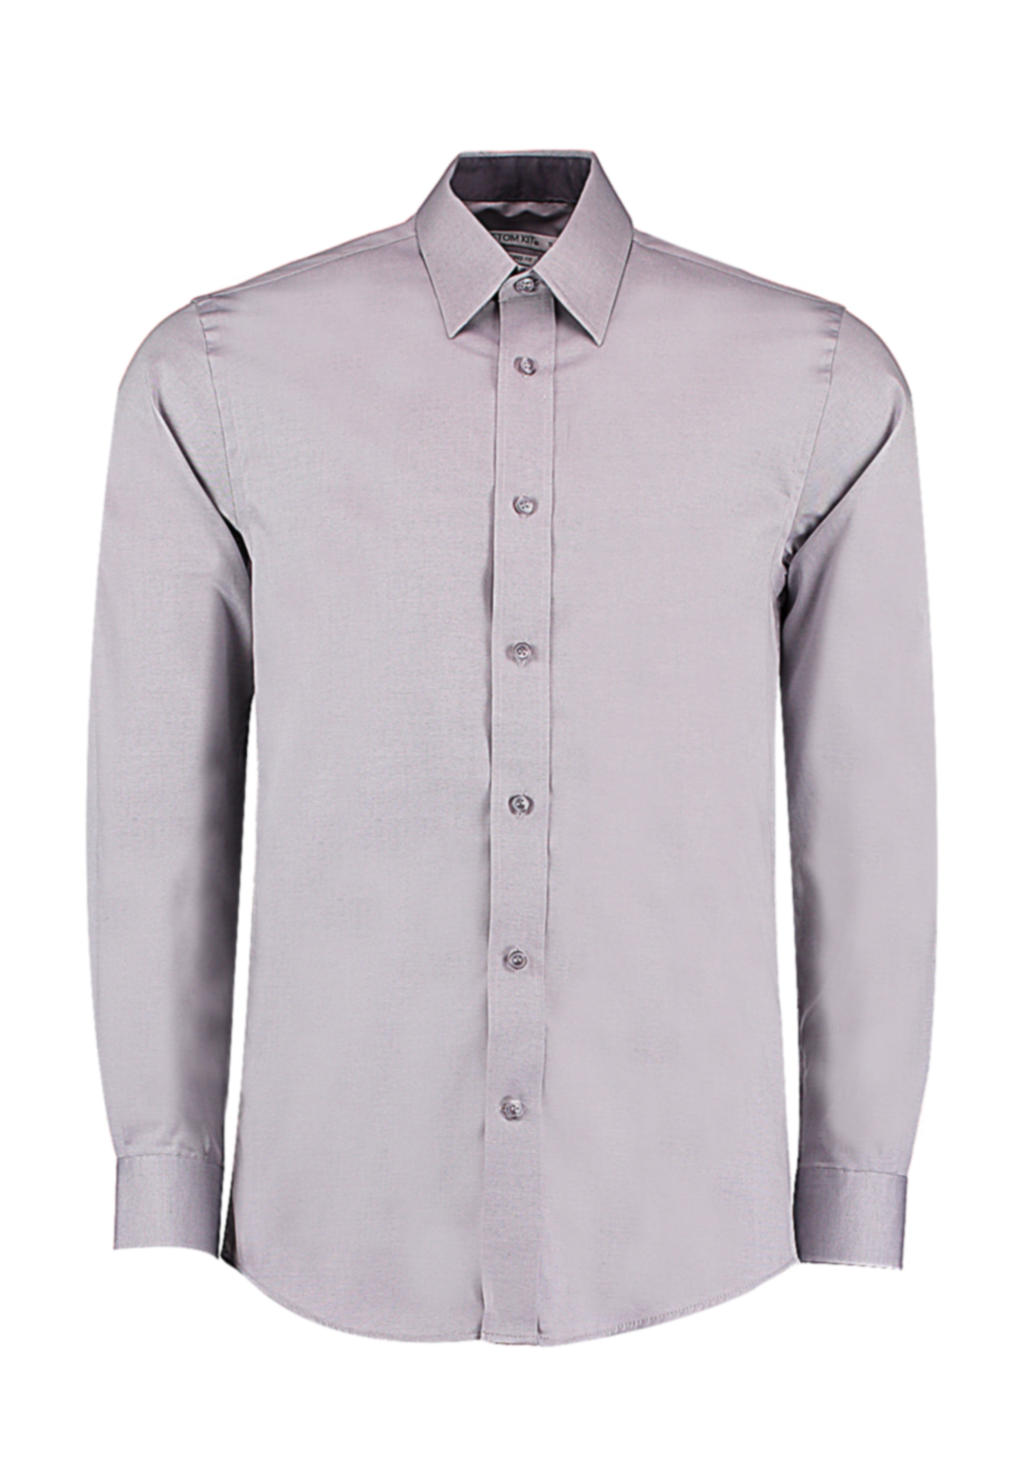  Tailored Fit Premium Contrast Oxford Shirt in Farbe Silver Grey/Charcoal